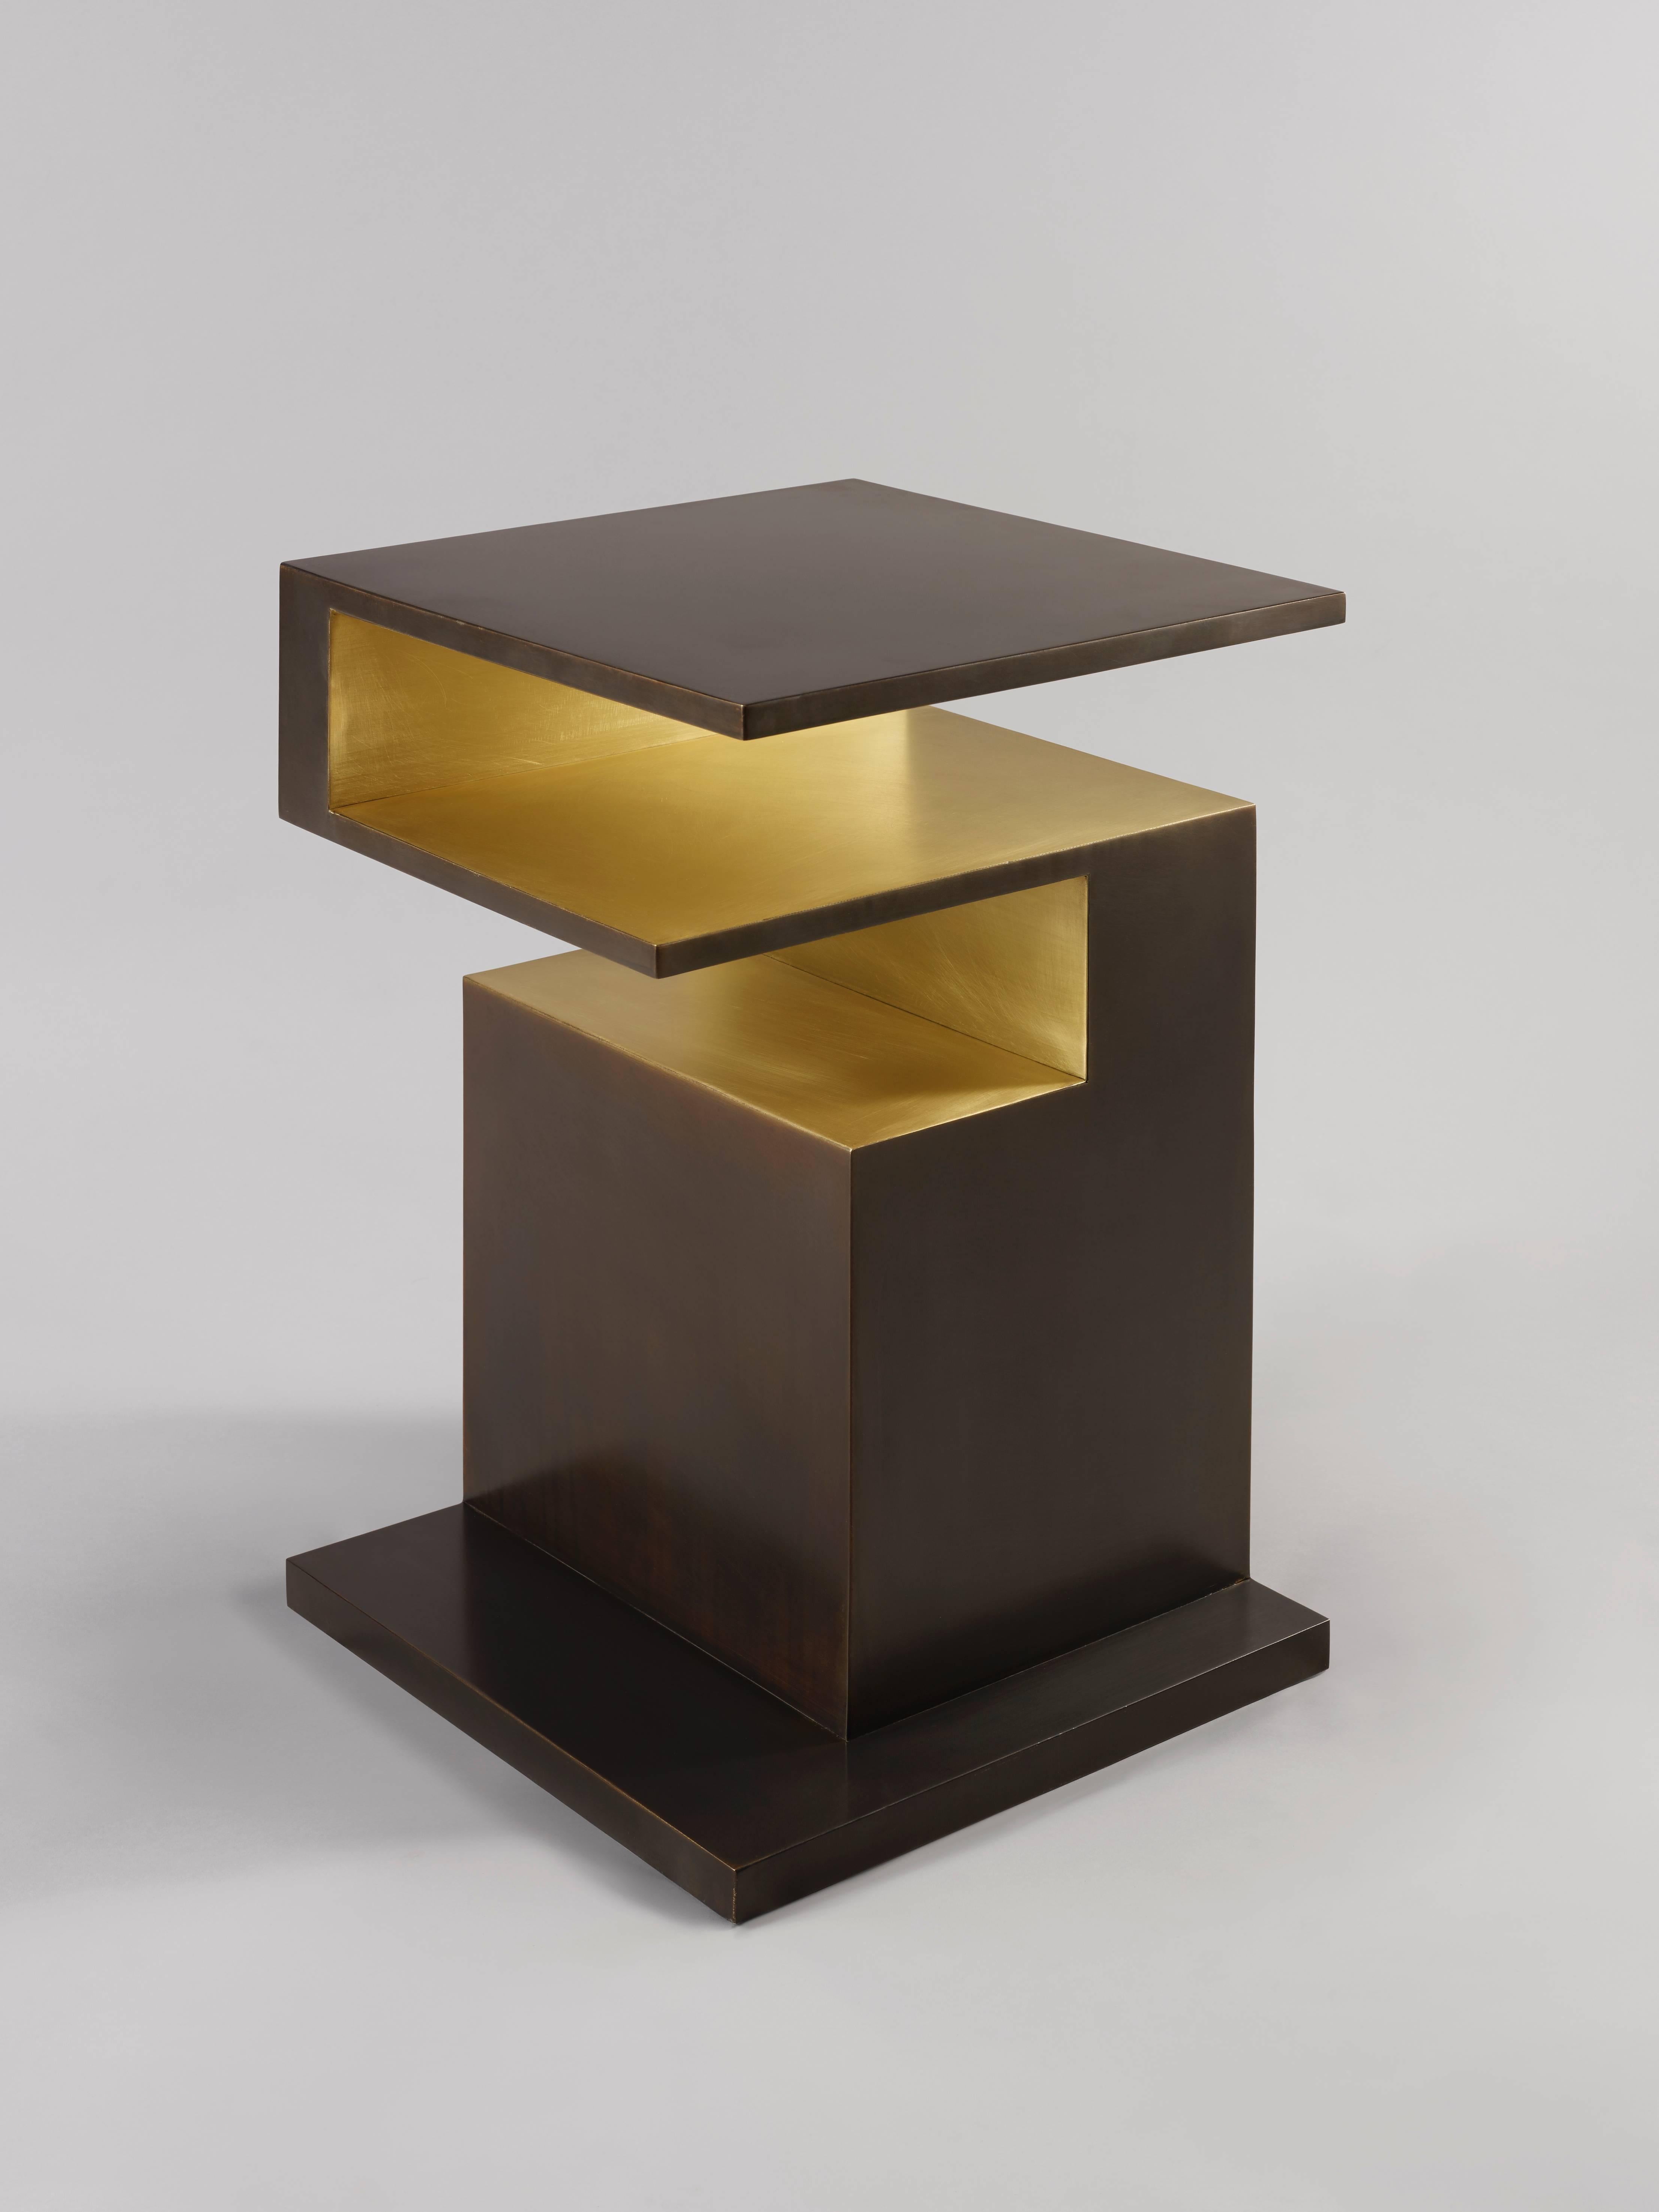 ‘XiangSheng II' Side Table is a collectible design work that combines champagne colored brushed bronze surface and oxidized bronze with an intense brown patina. This elegant table is part of the ‘XiangSheng’ furniture collection by much acclaimed